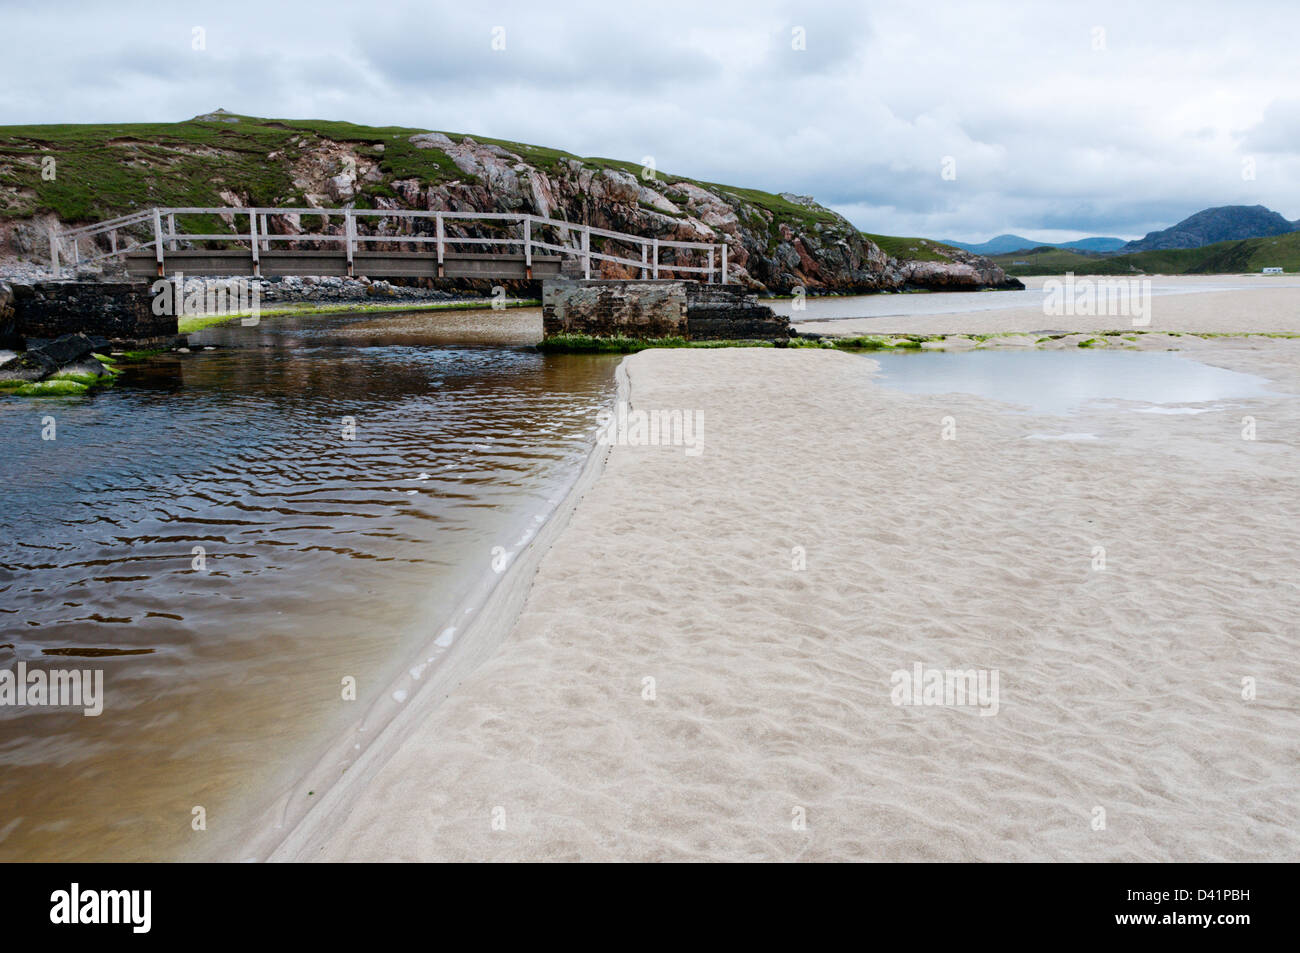 A footbridge across a small stream onto the sands at low tide at Tràigh Ùige on the Isle of Lewis in the Outer Hebrides. Stock Photo